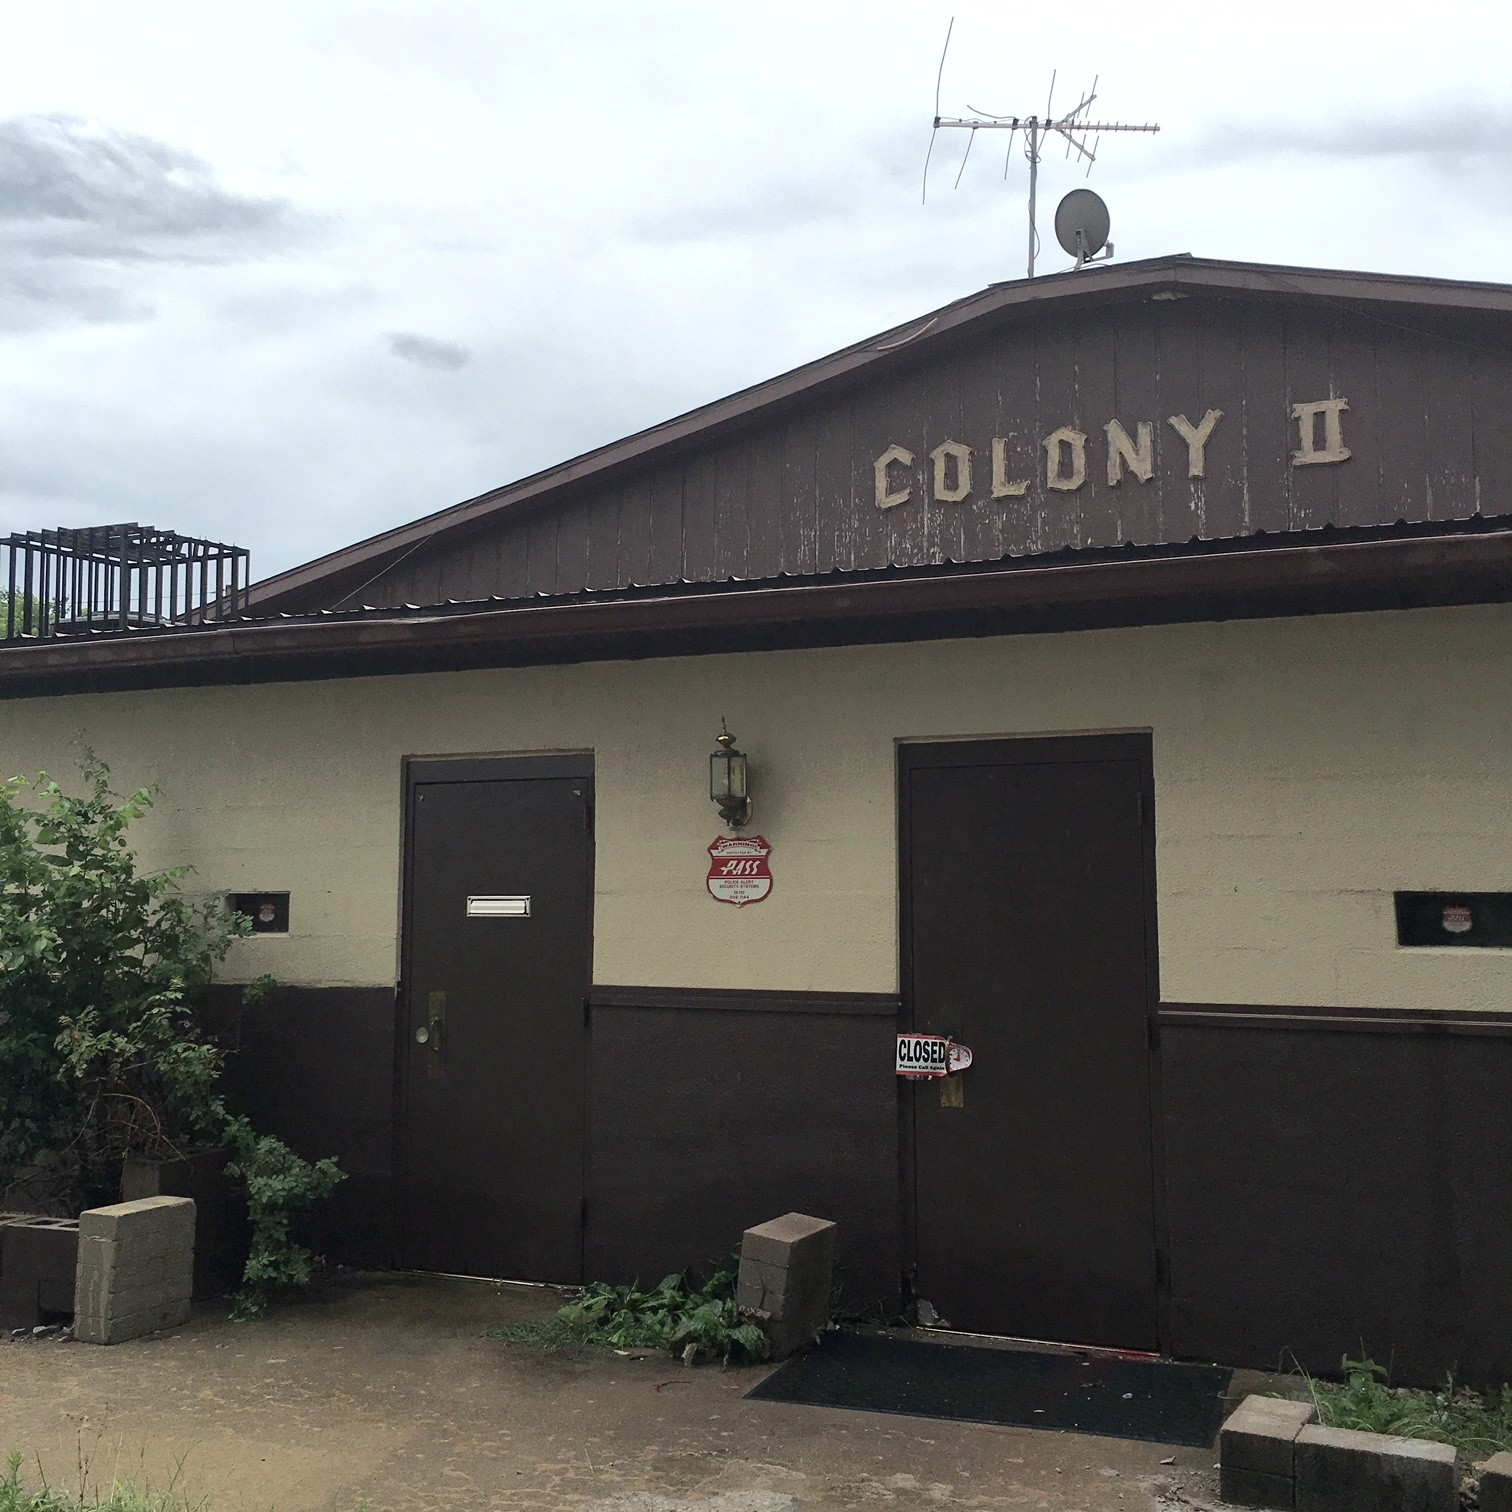 Goodbye to the Colony II, a Swinger/Adult Film Hub in East St